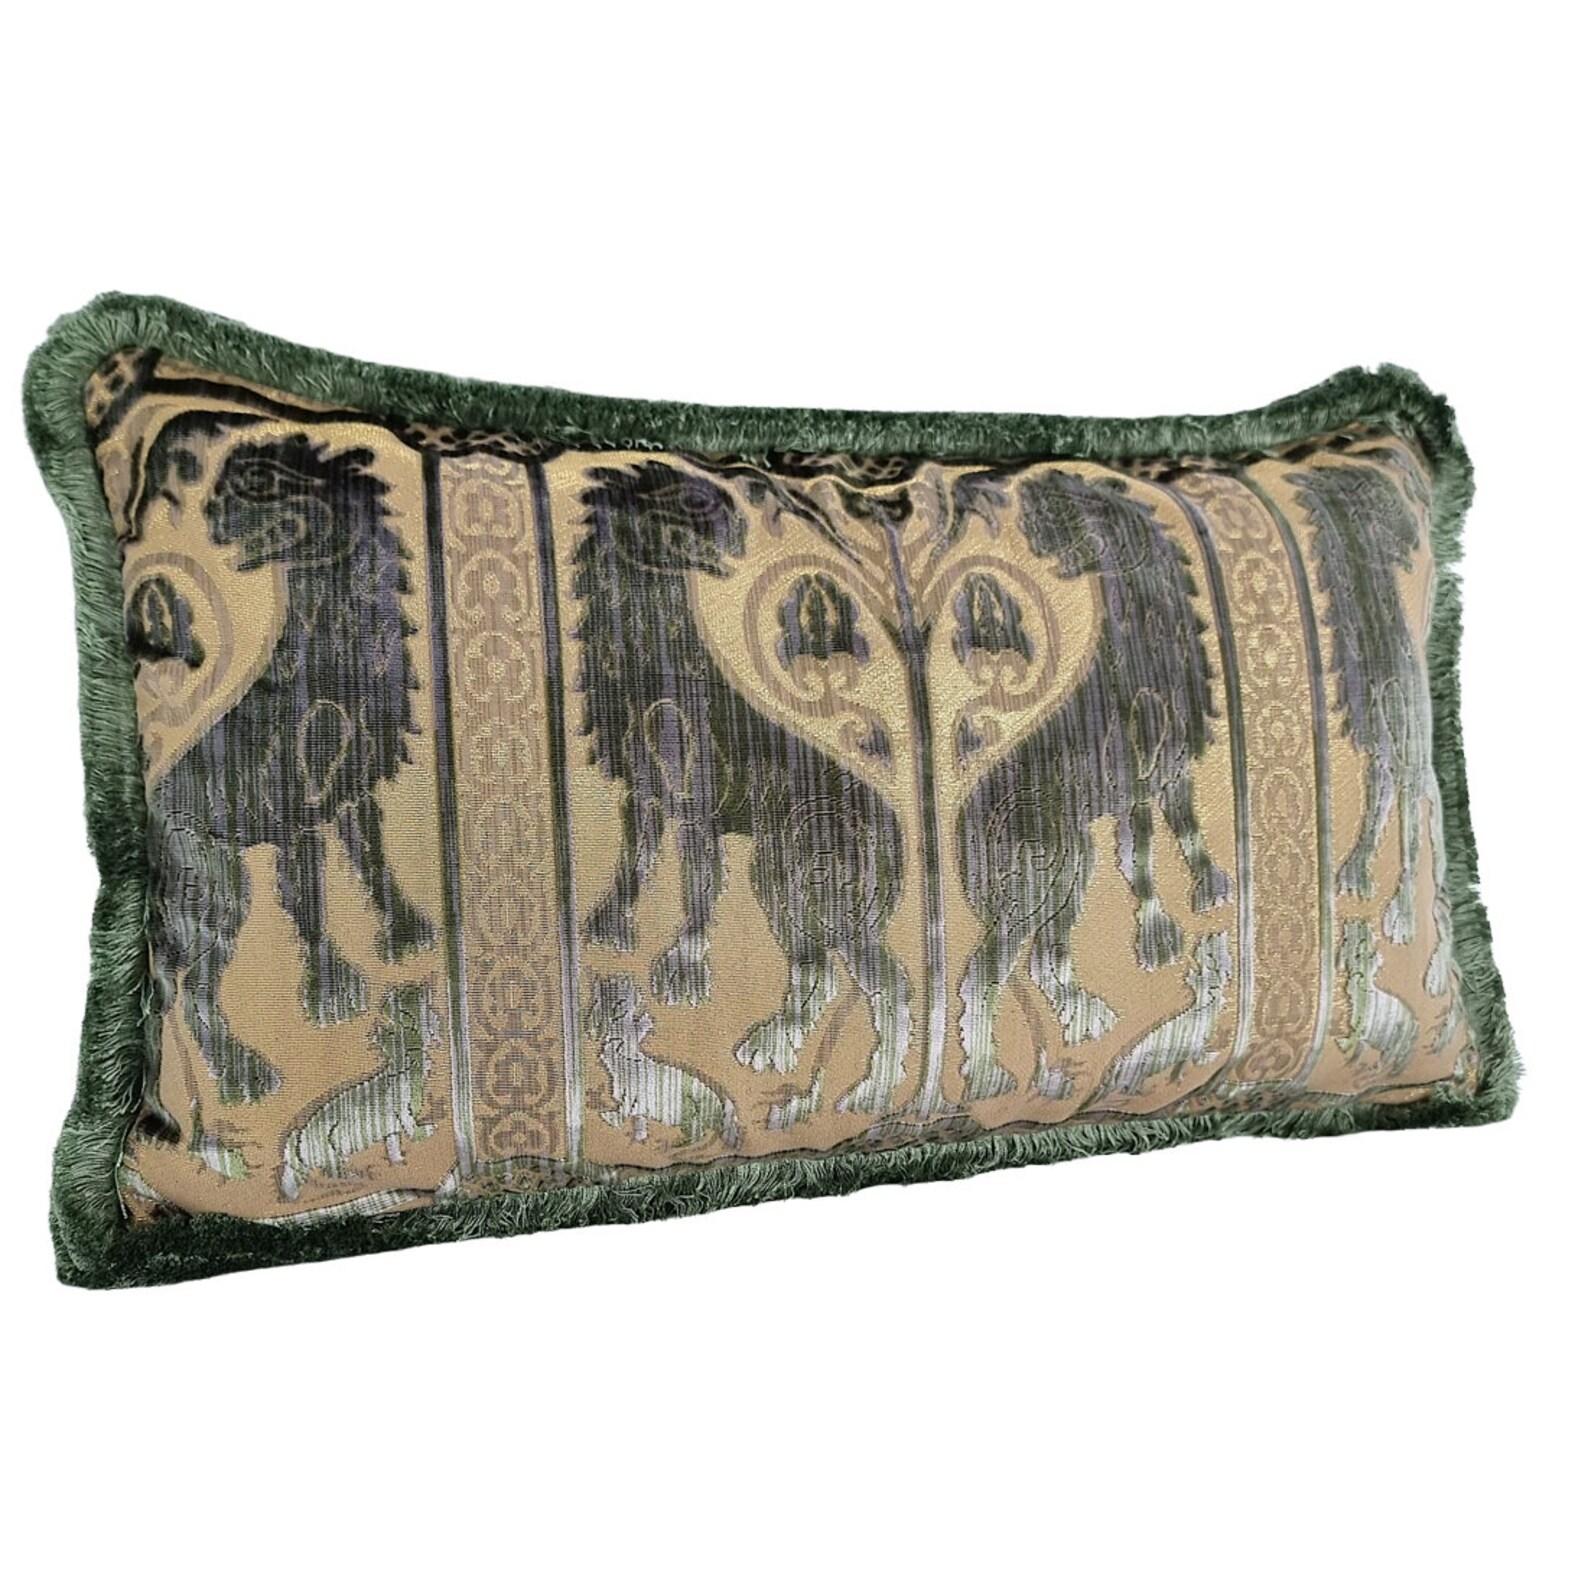 This amazing lumbar pillow is handmade using the iconic Leoni Bizantini - XII-XIV century design - silk heddle velvet in olive green color from 